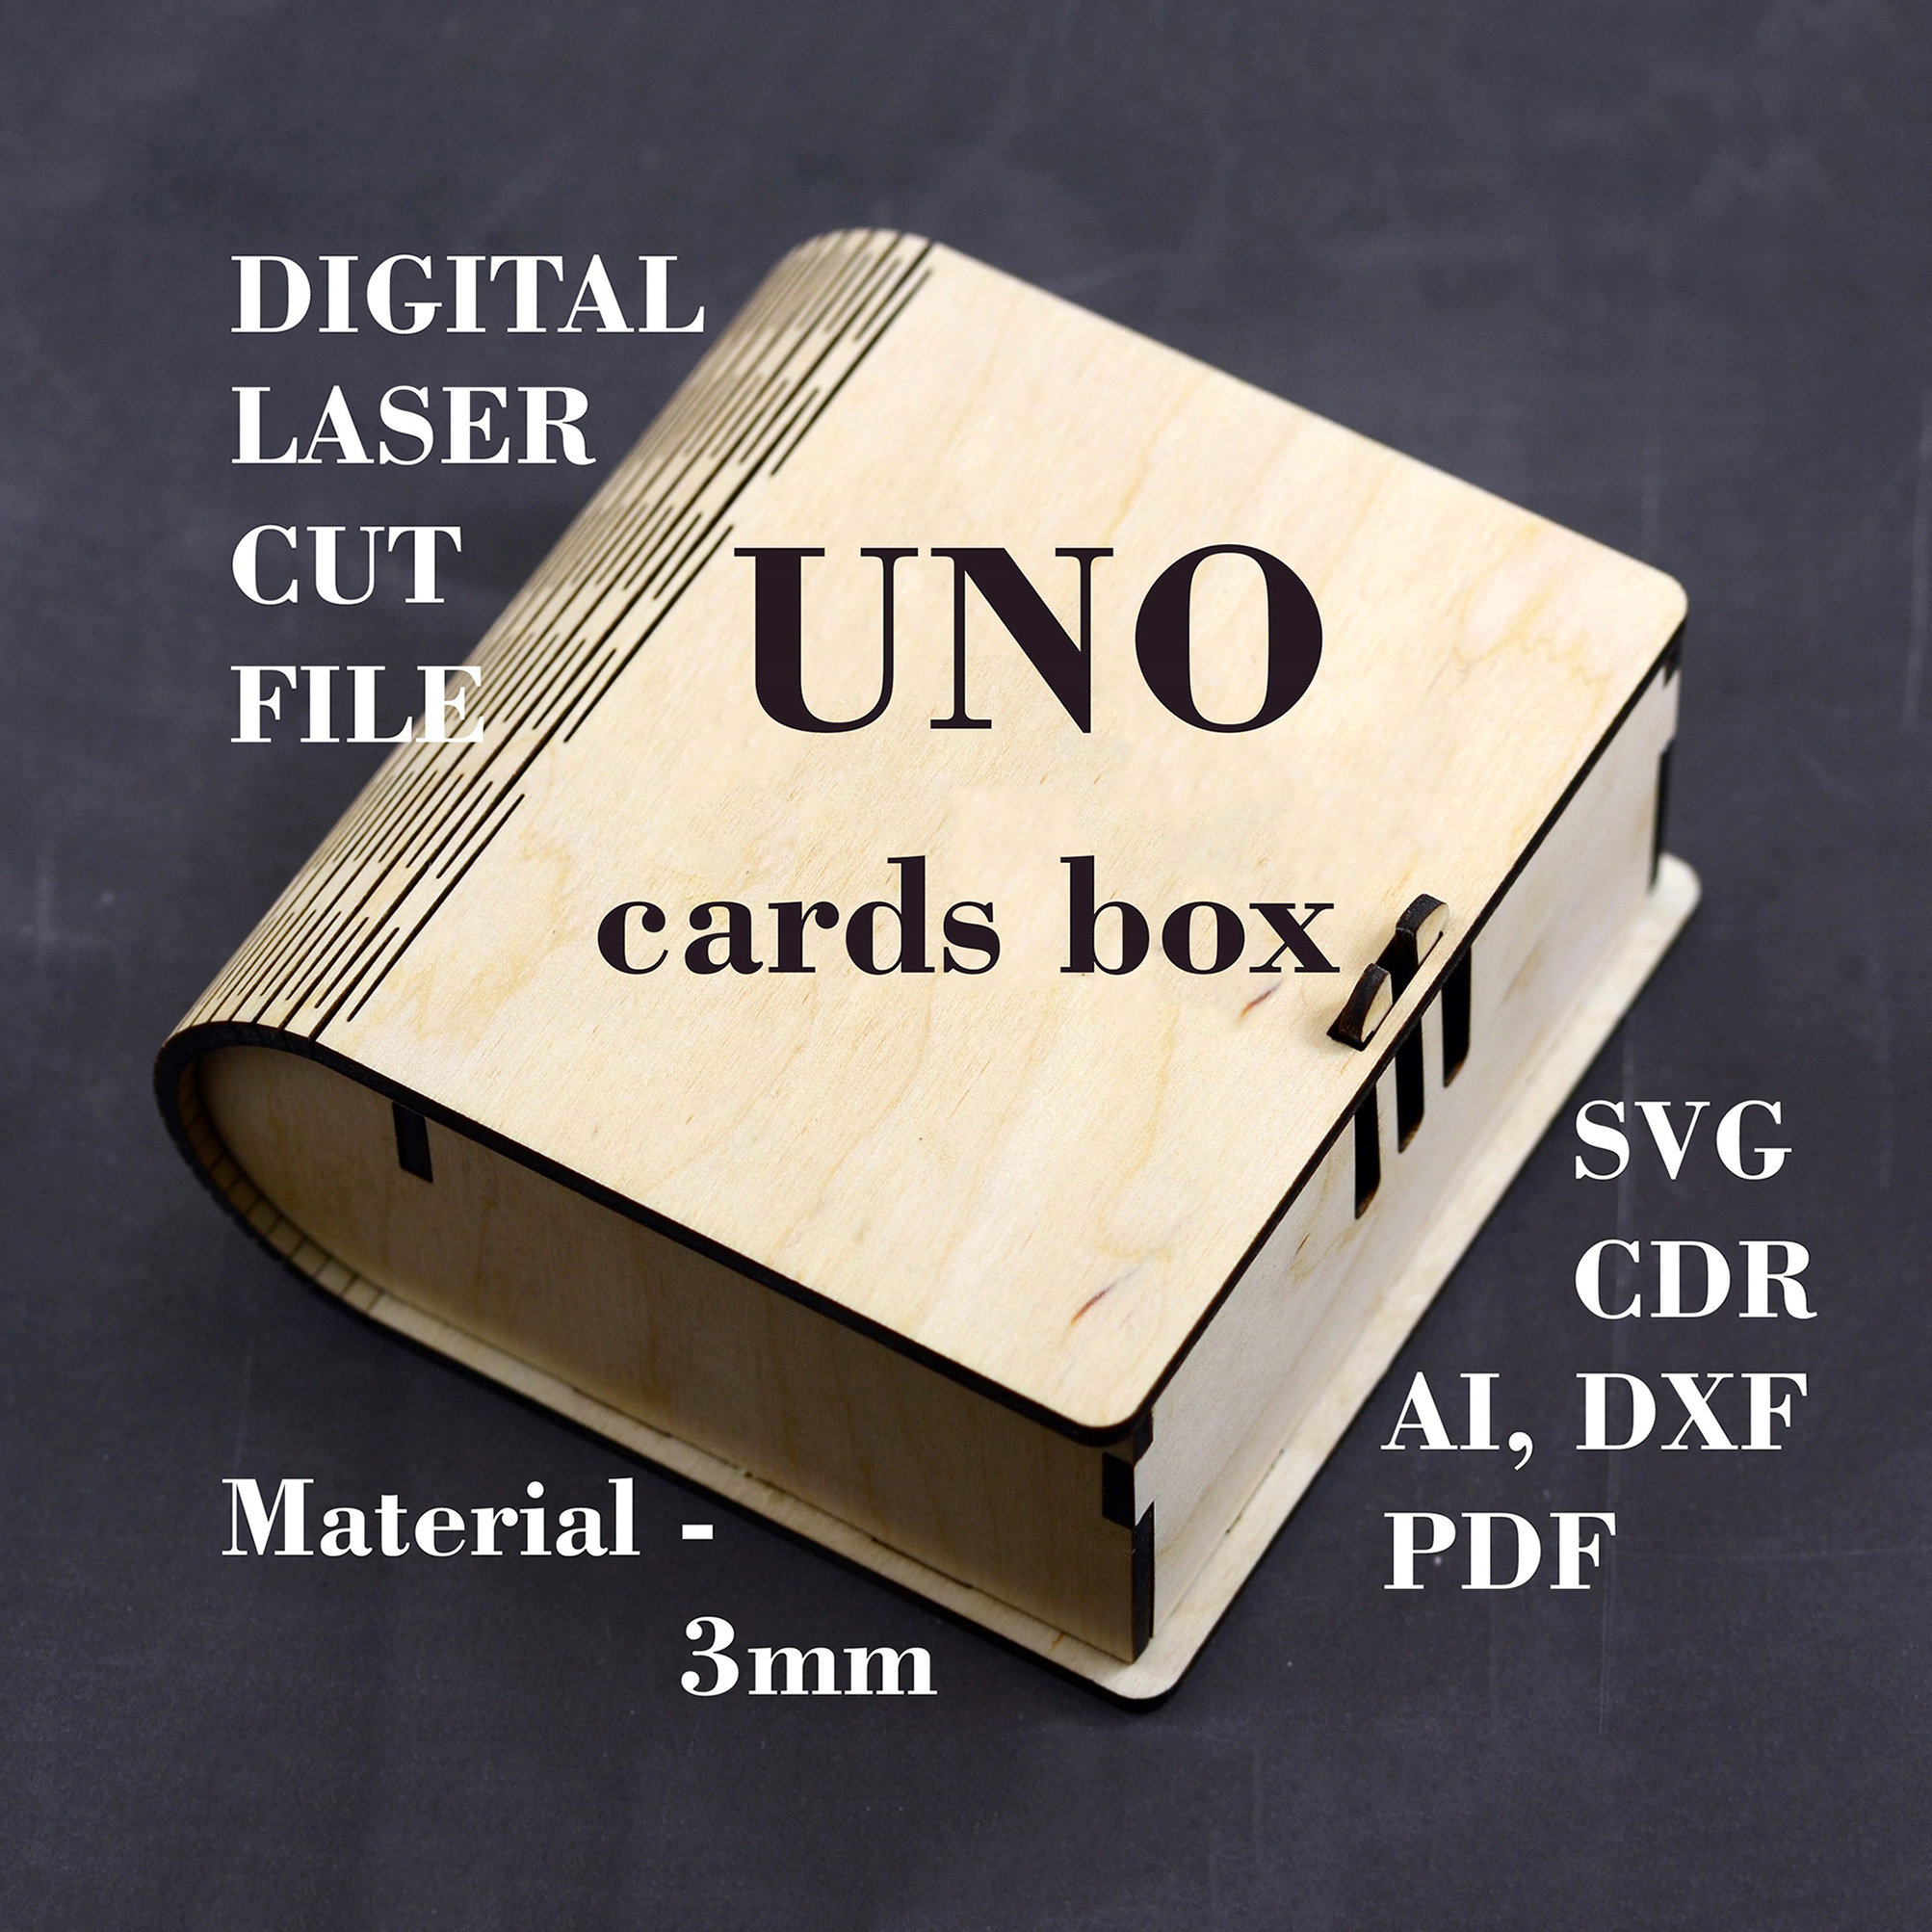 Wooden Book for UNO Flip Card Game Custom Made Game Storage Box